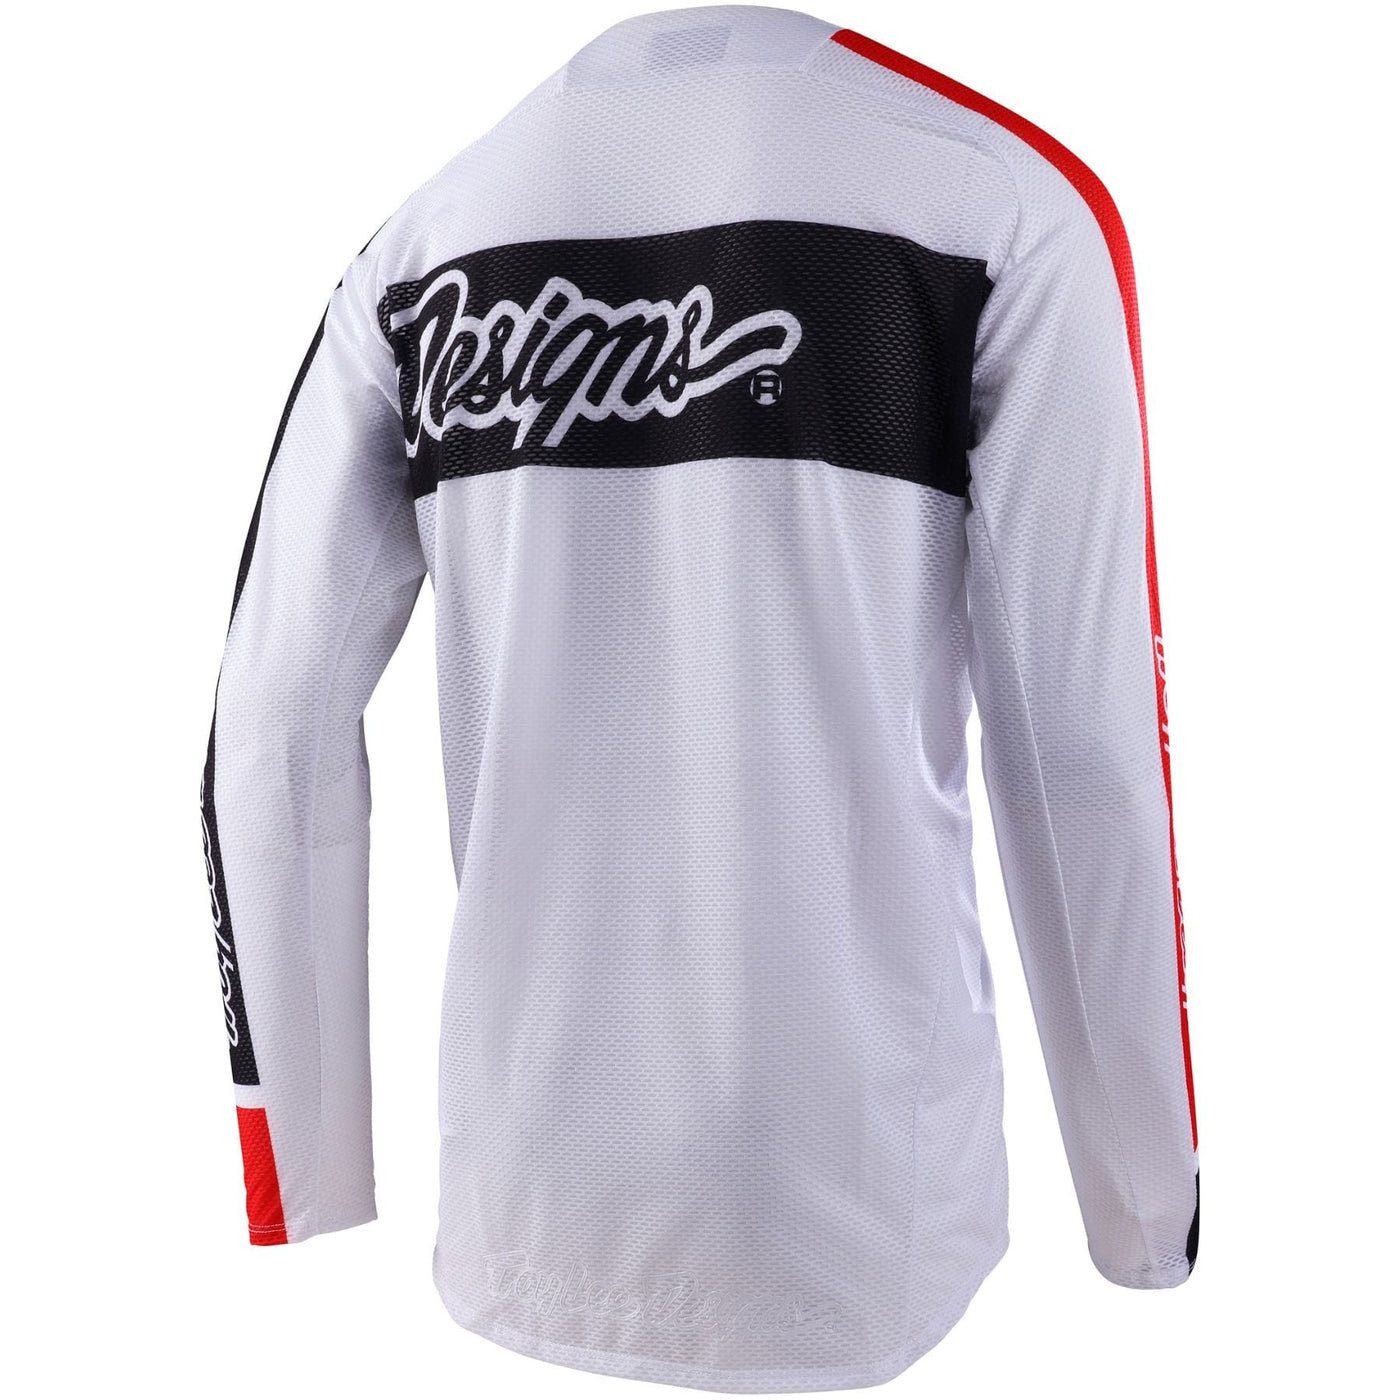 Troy Lee Designs SE PRO AIR Jersey Vox - White 8Lines Shop - Fast Shipping